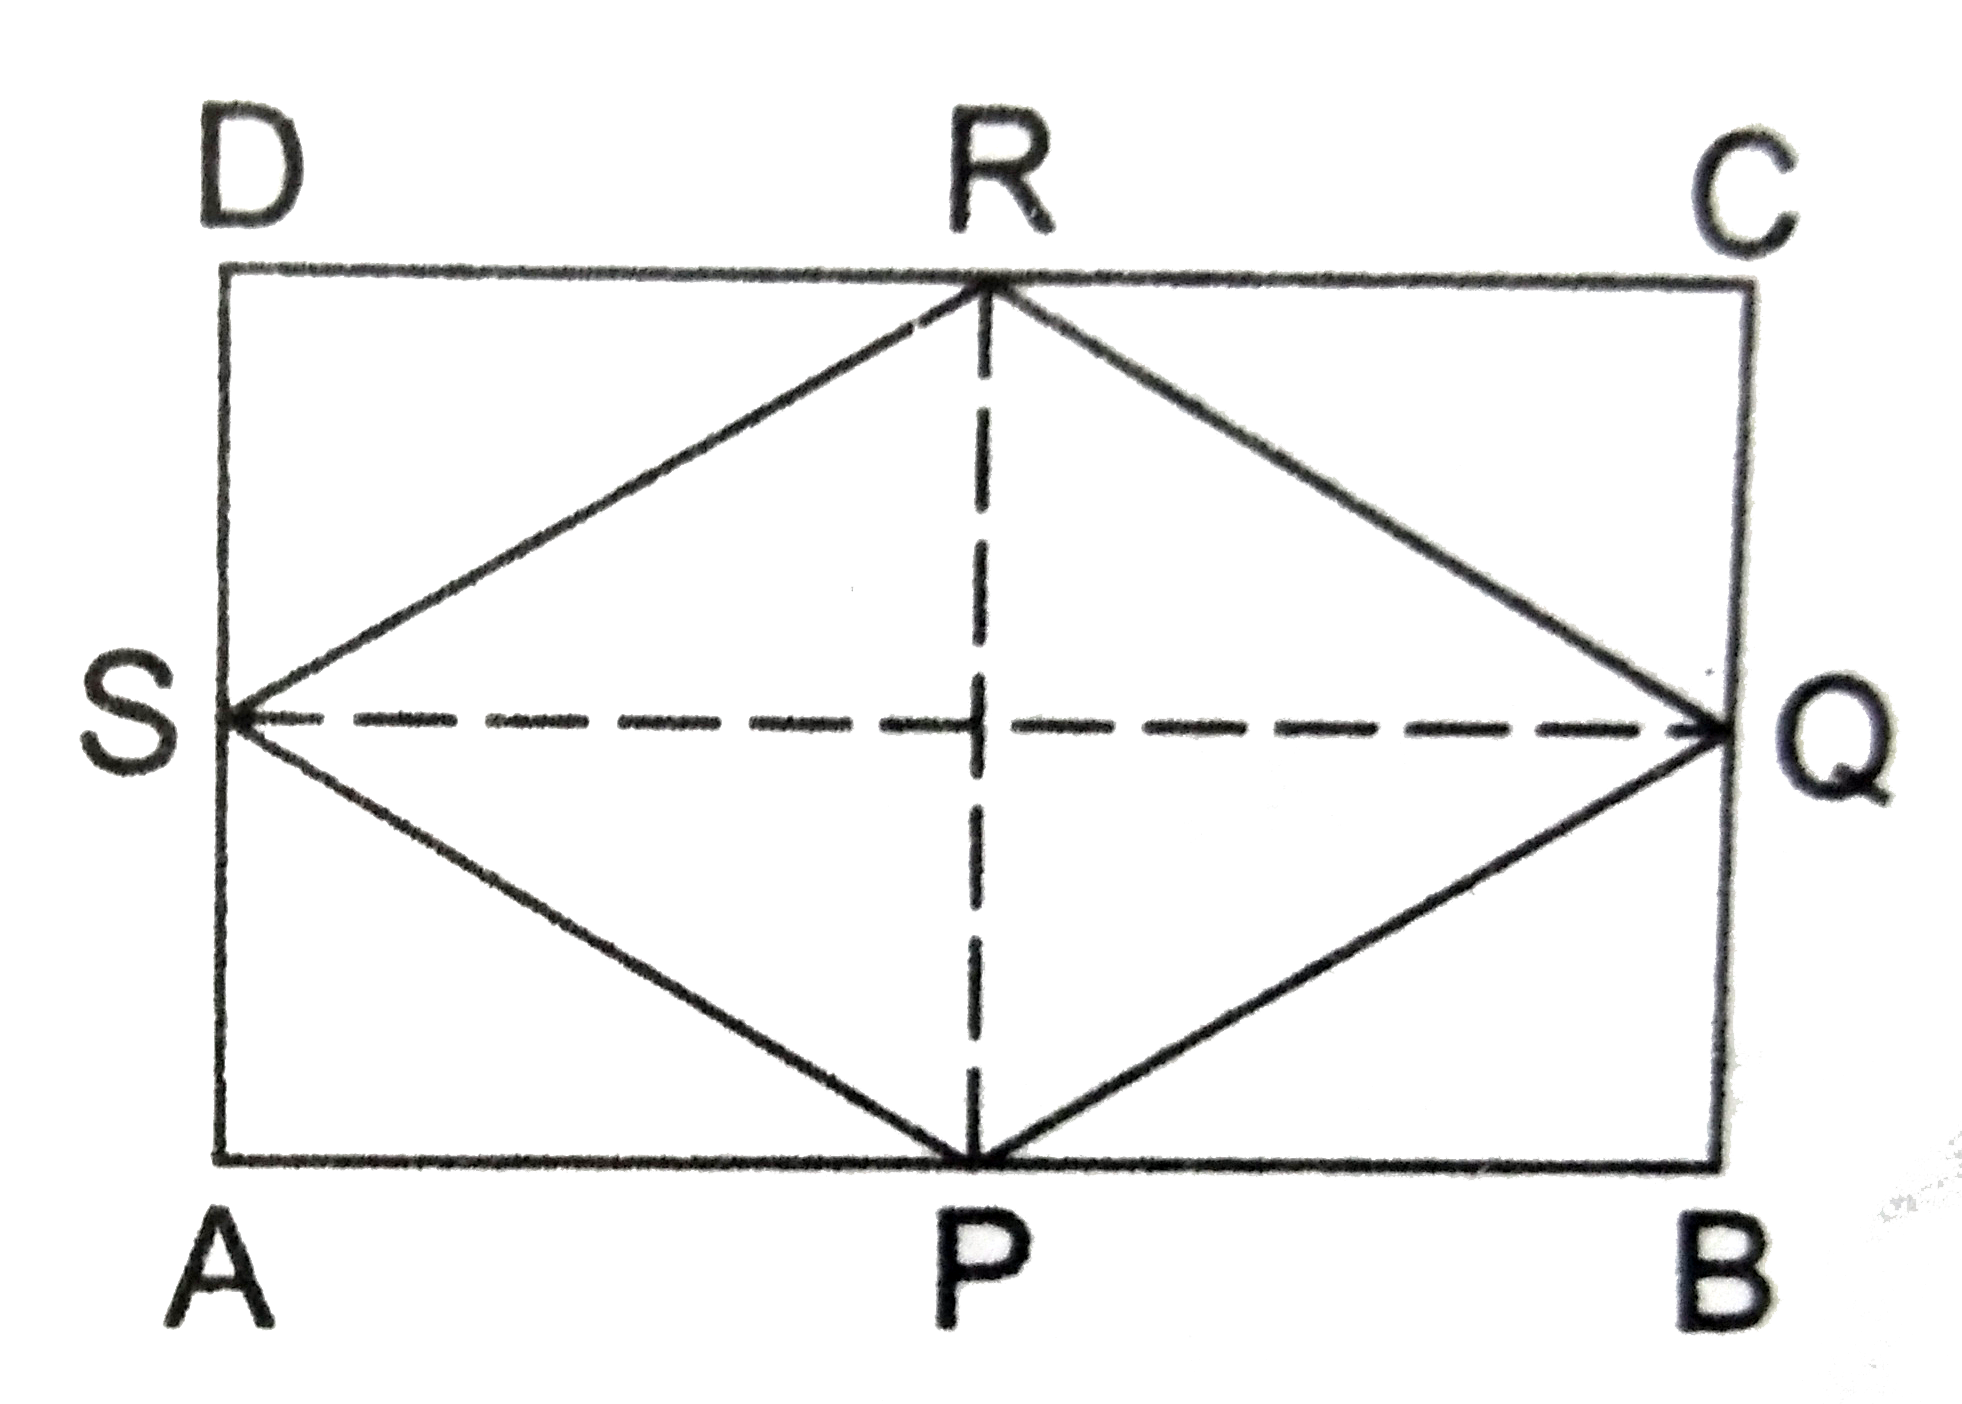 The figure formed by joining the midpoints of the adjacent sides of a rectangle of sides 8 cm and 6 cm is a